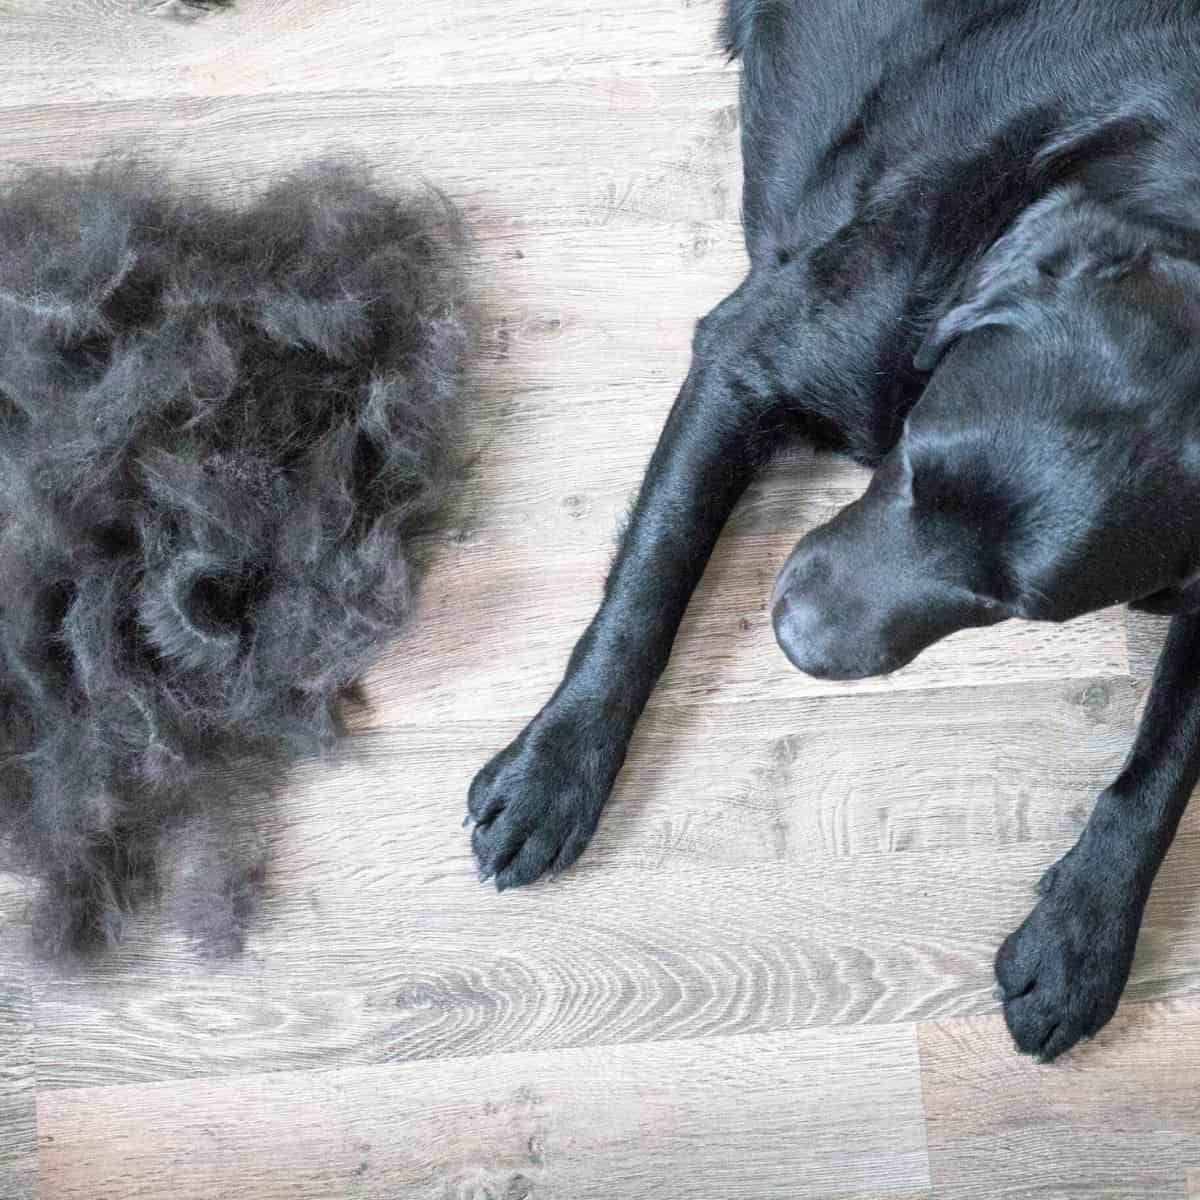 A grey dig from above lying next to a large pile of his hair that he just shed.